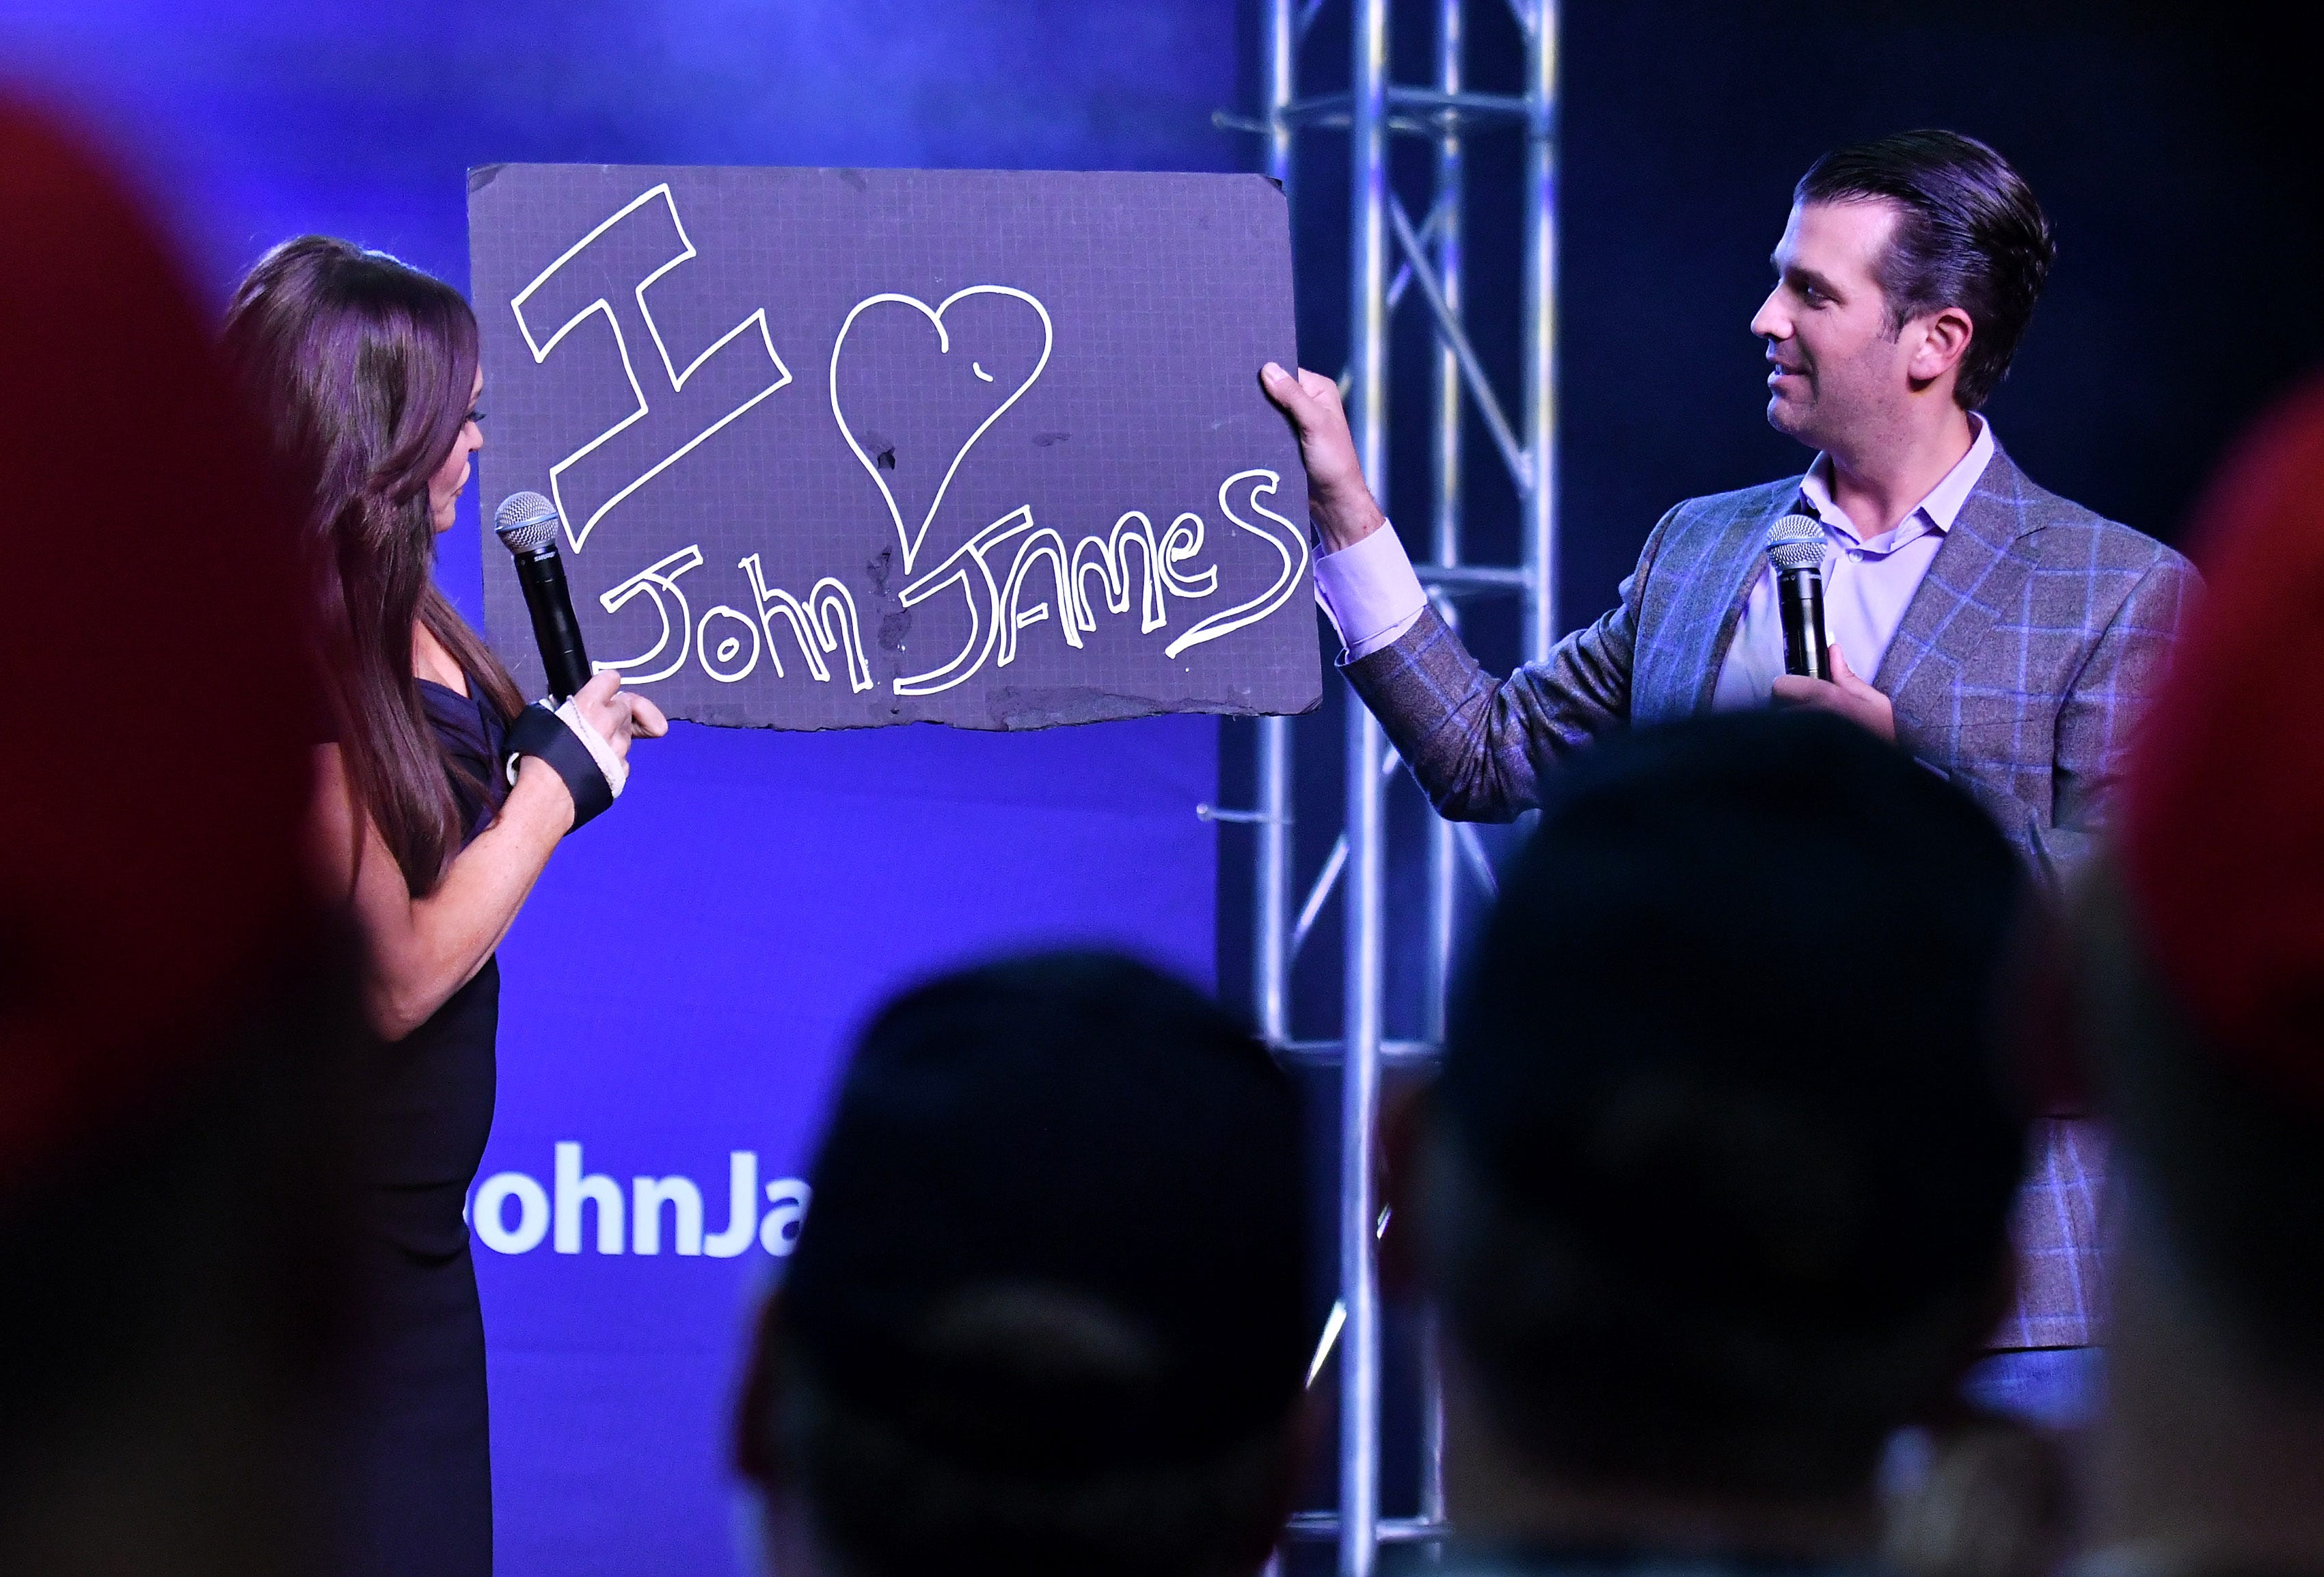 Donald Trump, Jr. right, and Kimberly Guilfoyle hold up a "I love John James" sign during the rally.